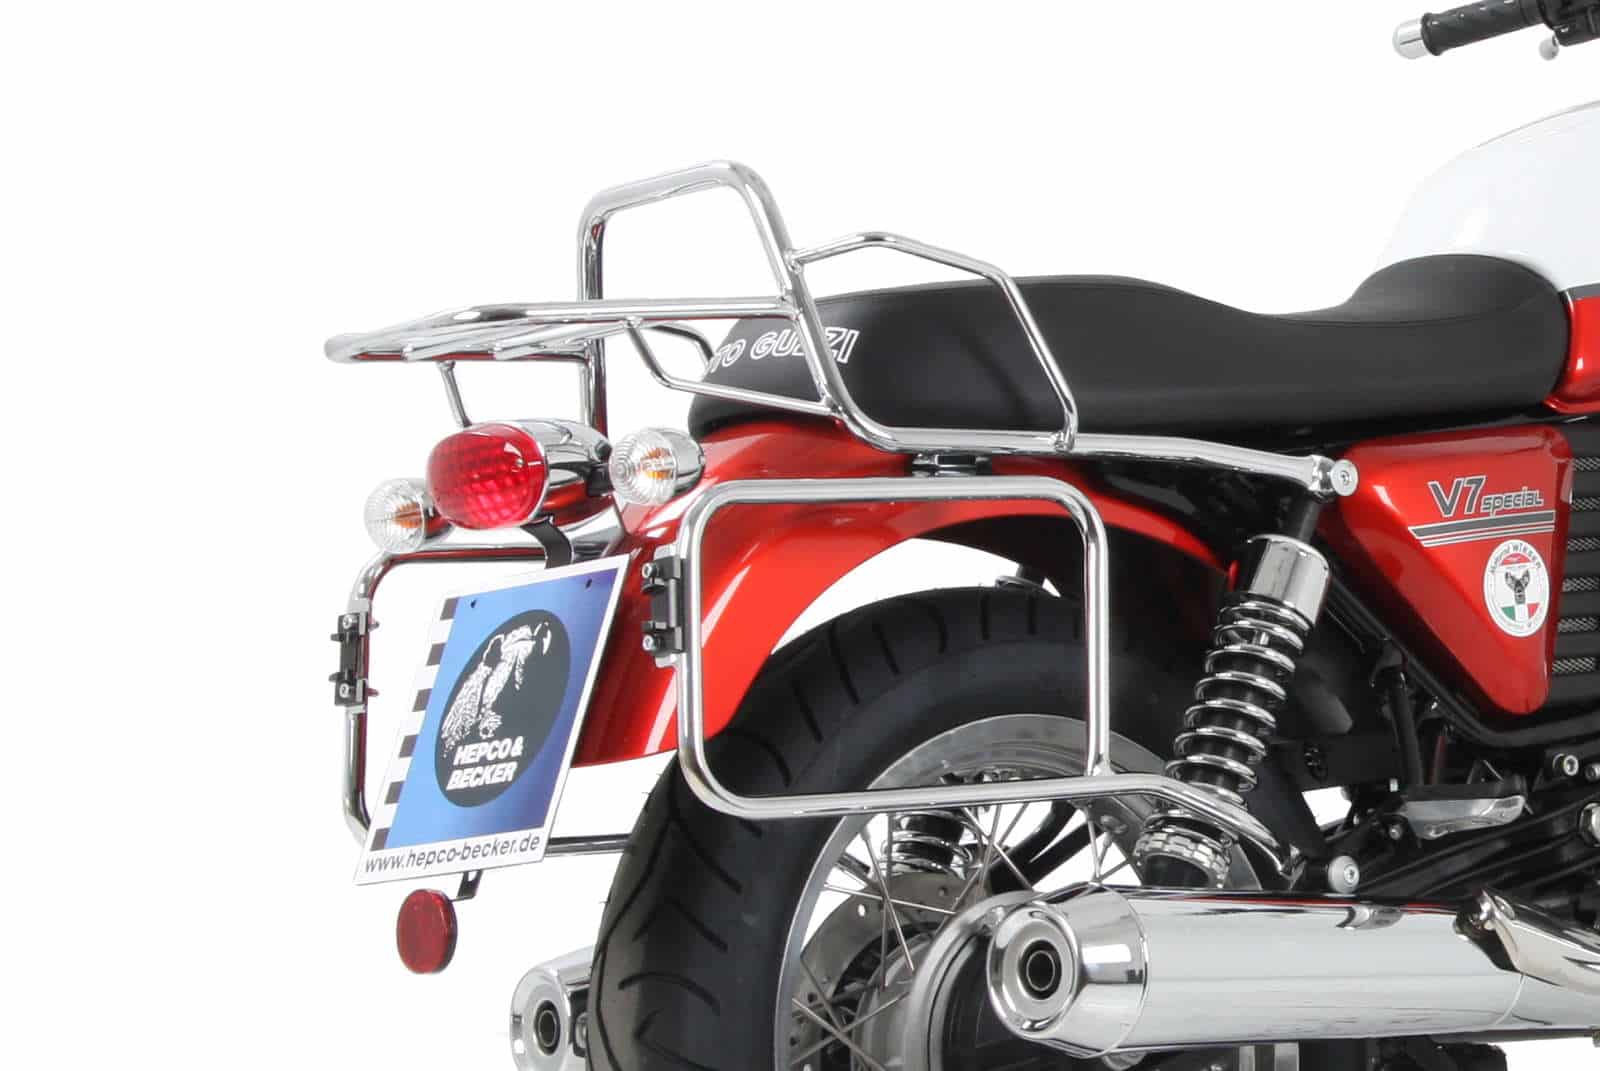 Sidecarrier permanent mounted chrome for Moto Guzzi V 7 Classic/Special (2008-2014)